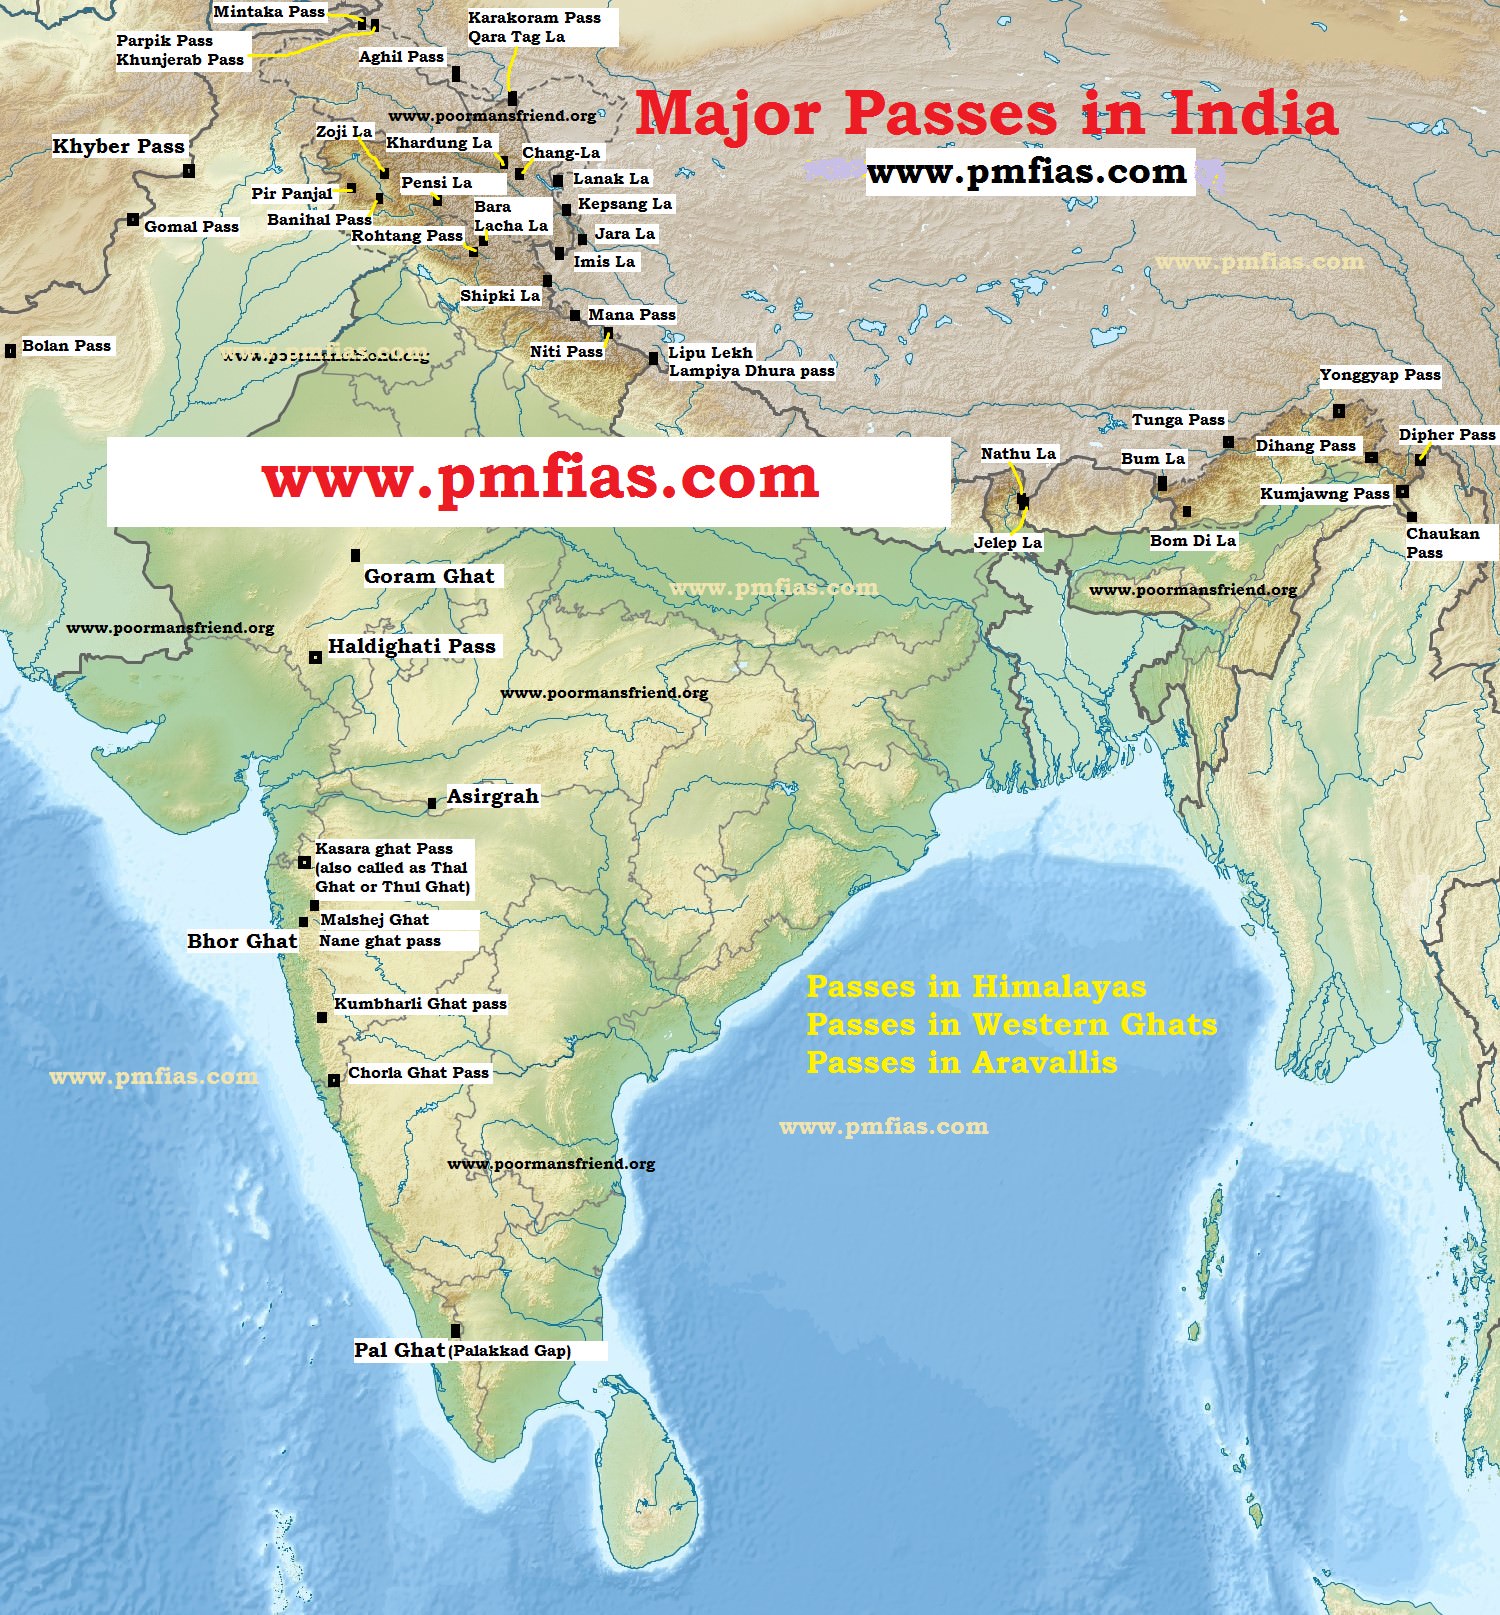 Mountain Passes in India